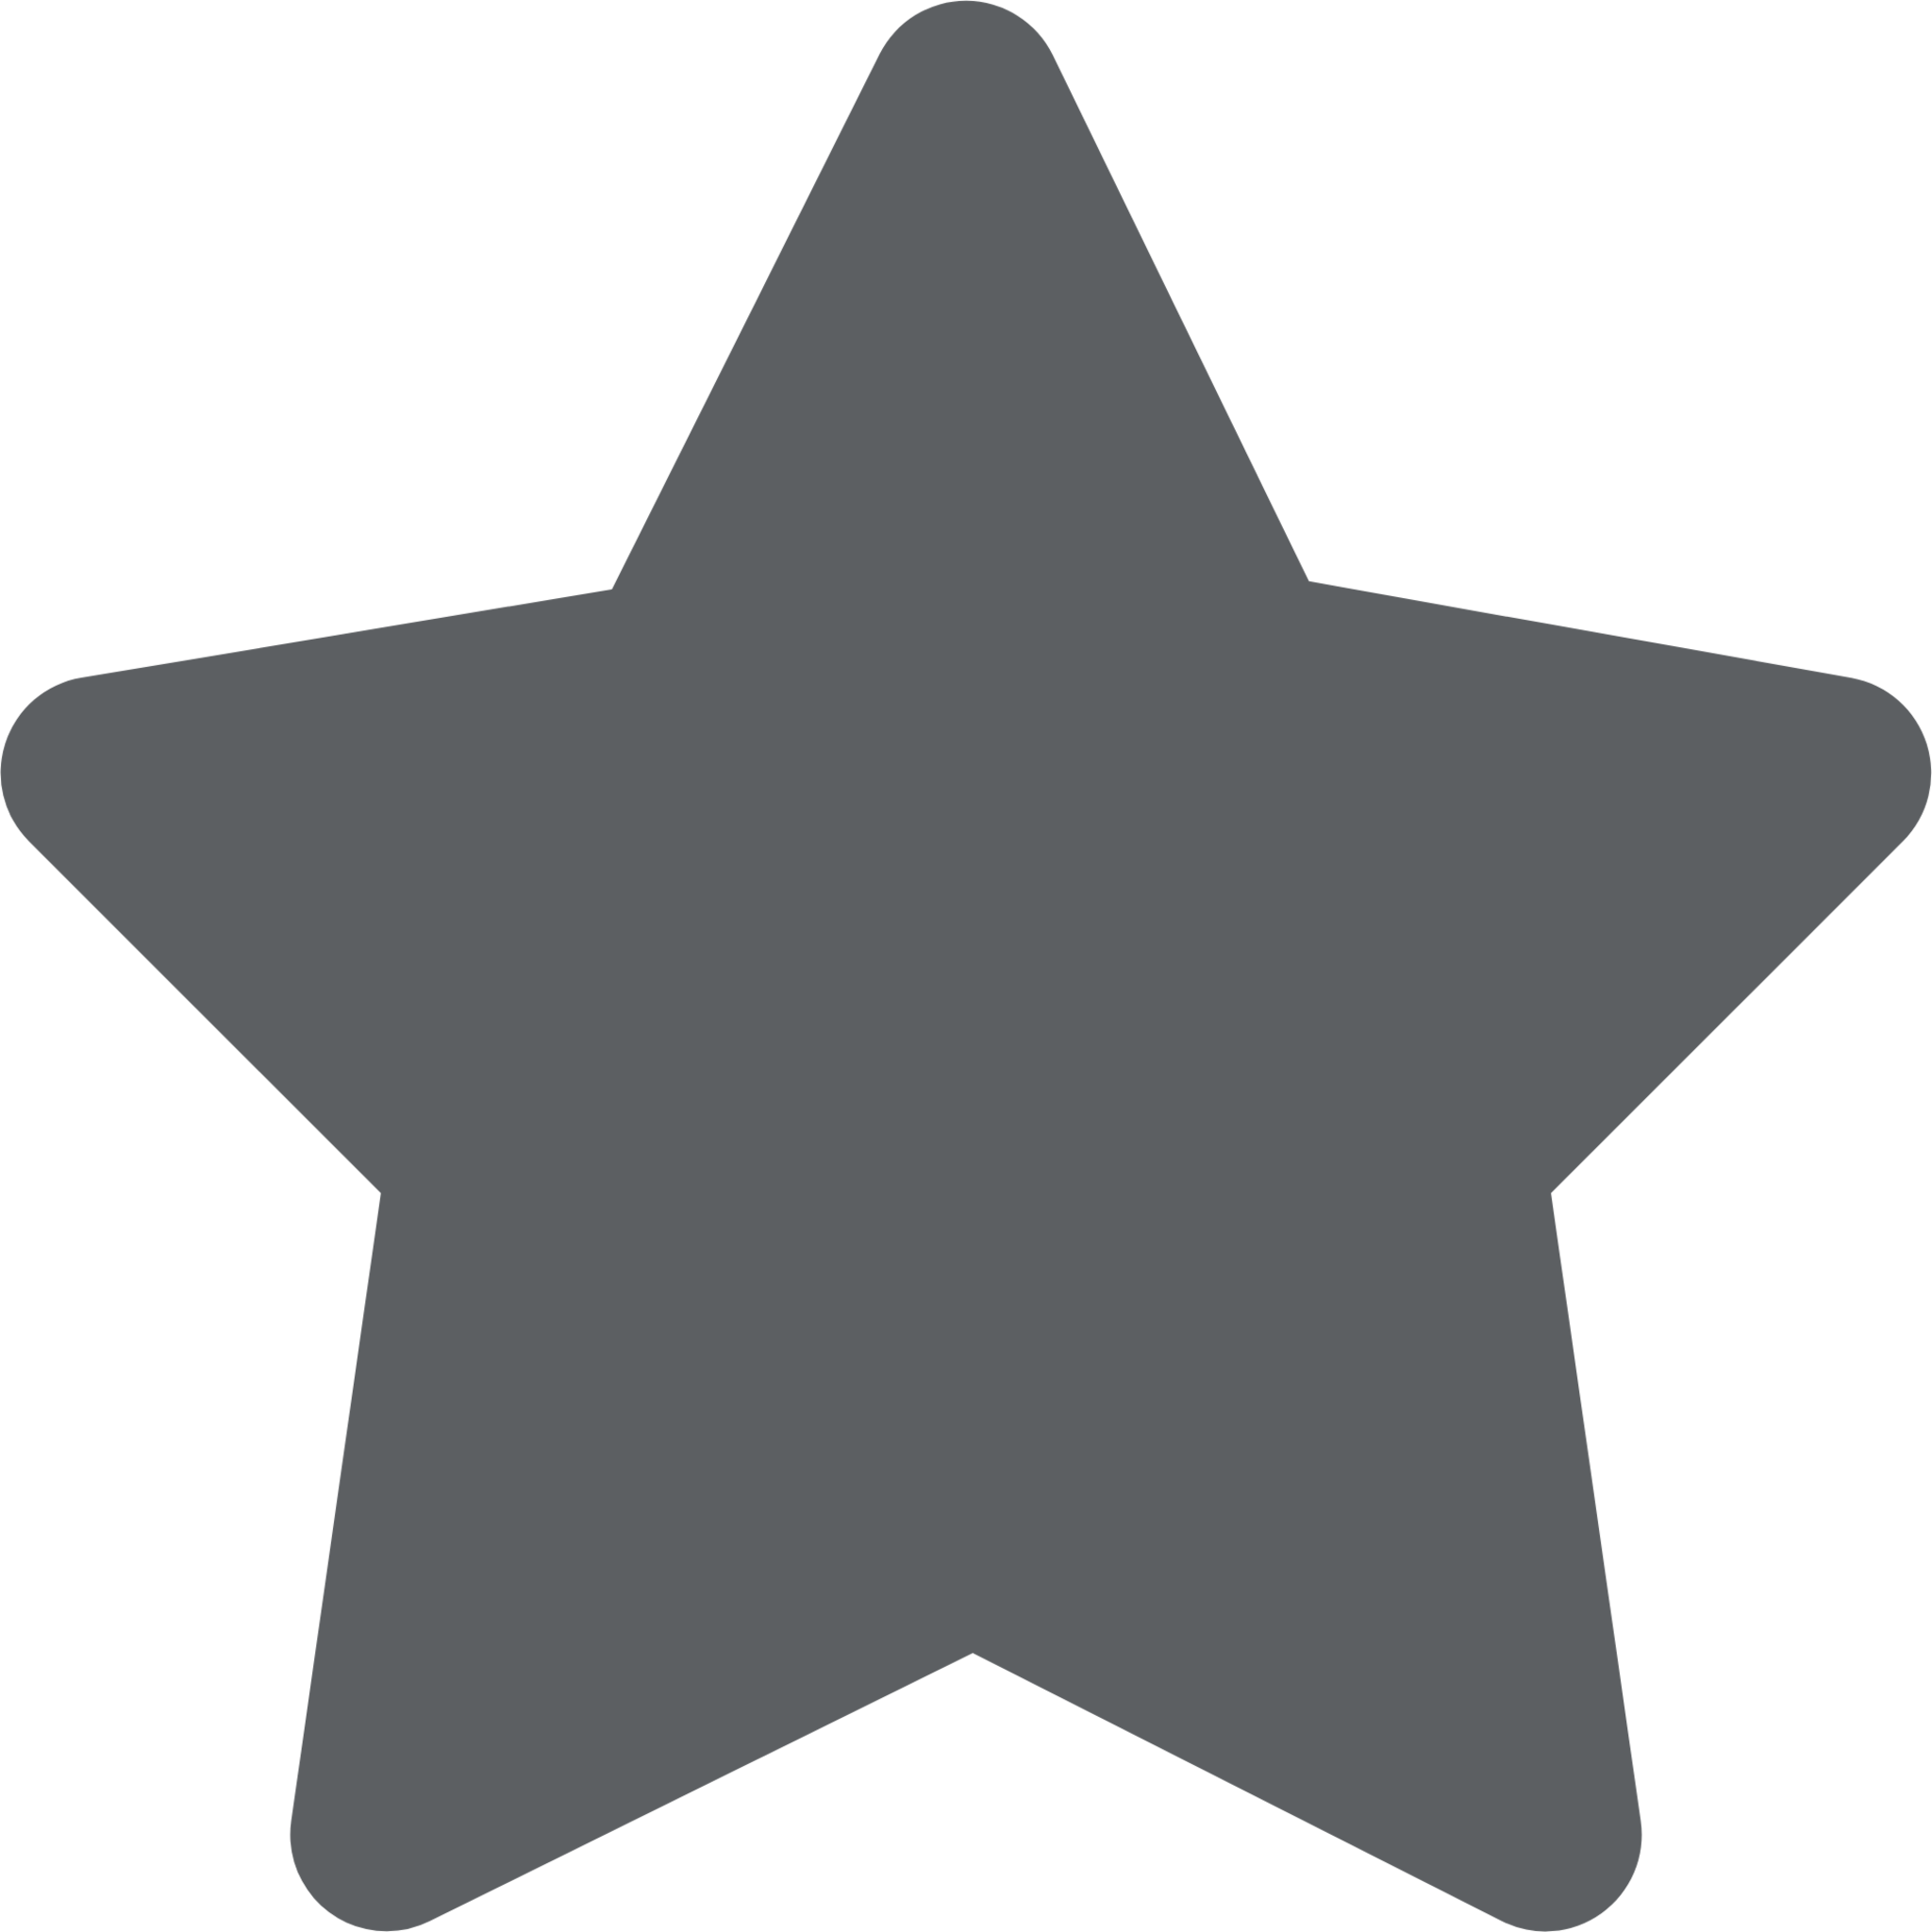 star filled minor icon